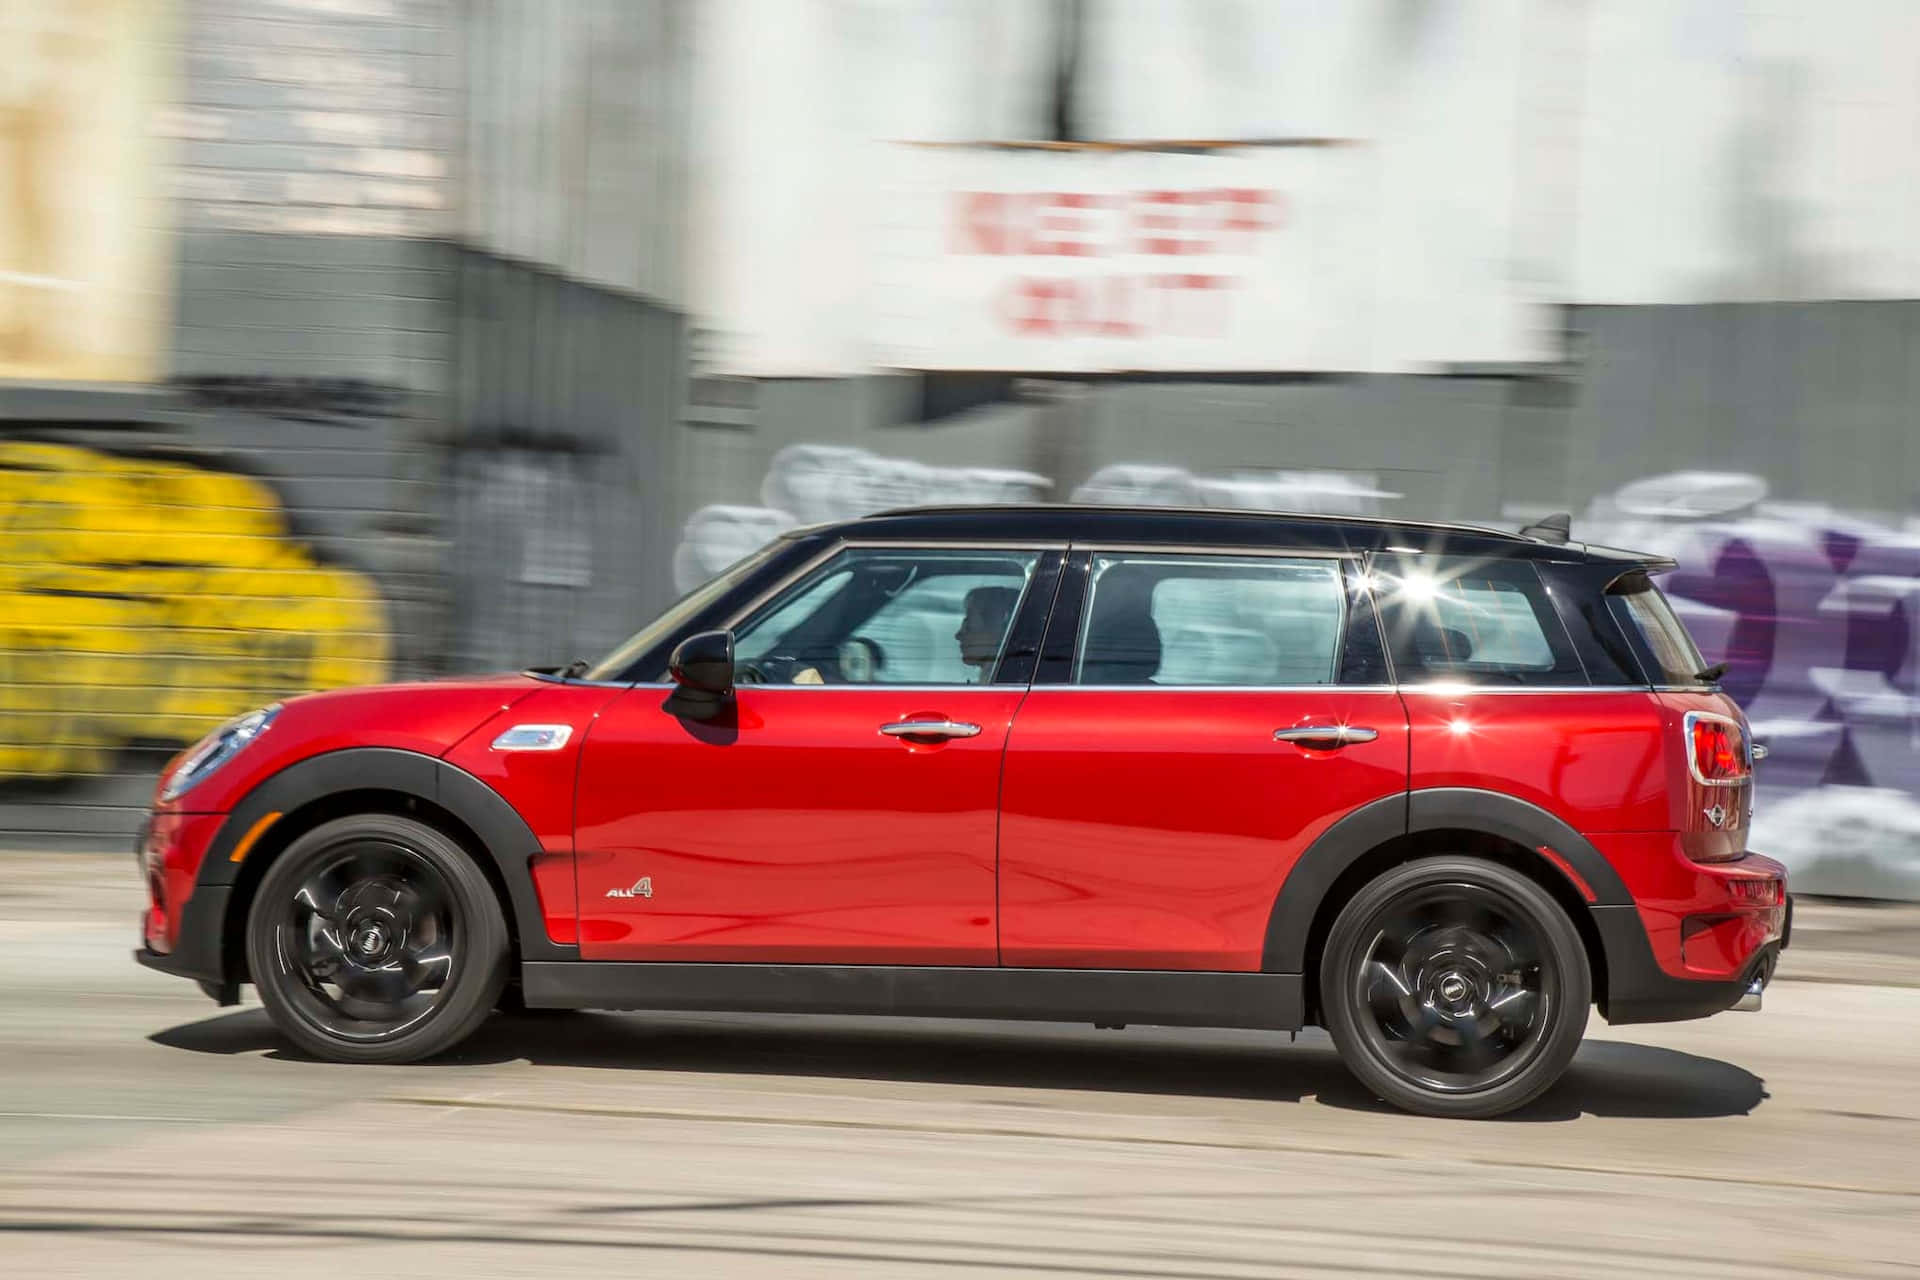 Captivating Mini Cooper S Clubman All4 in Action Wallpaper